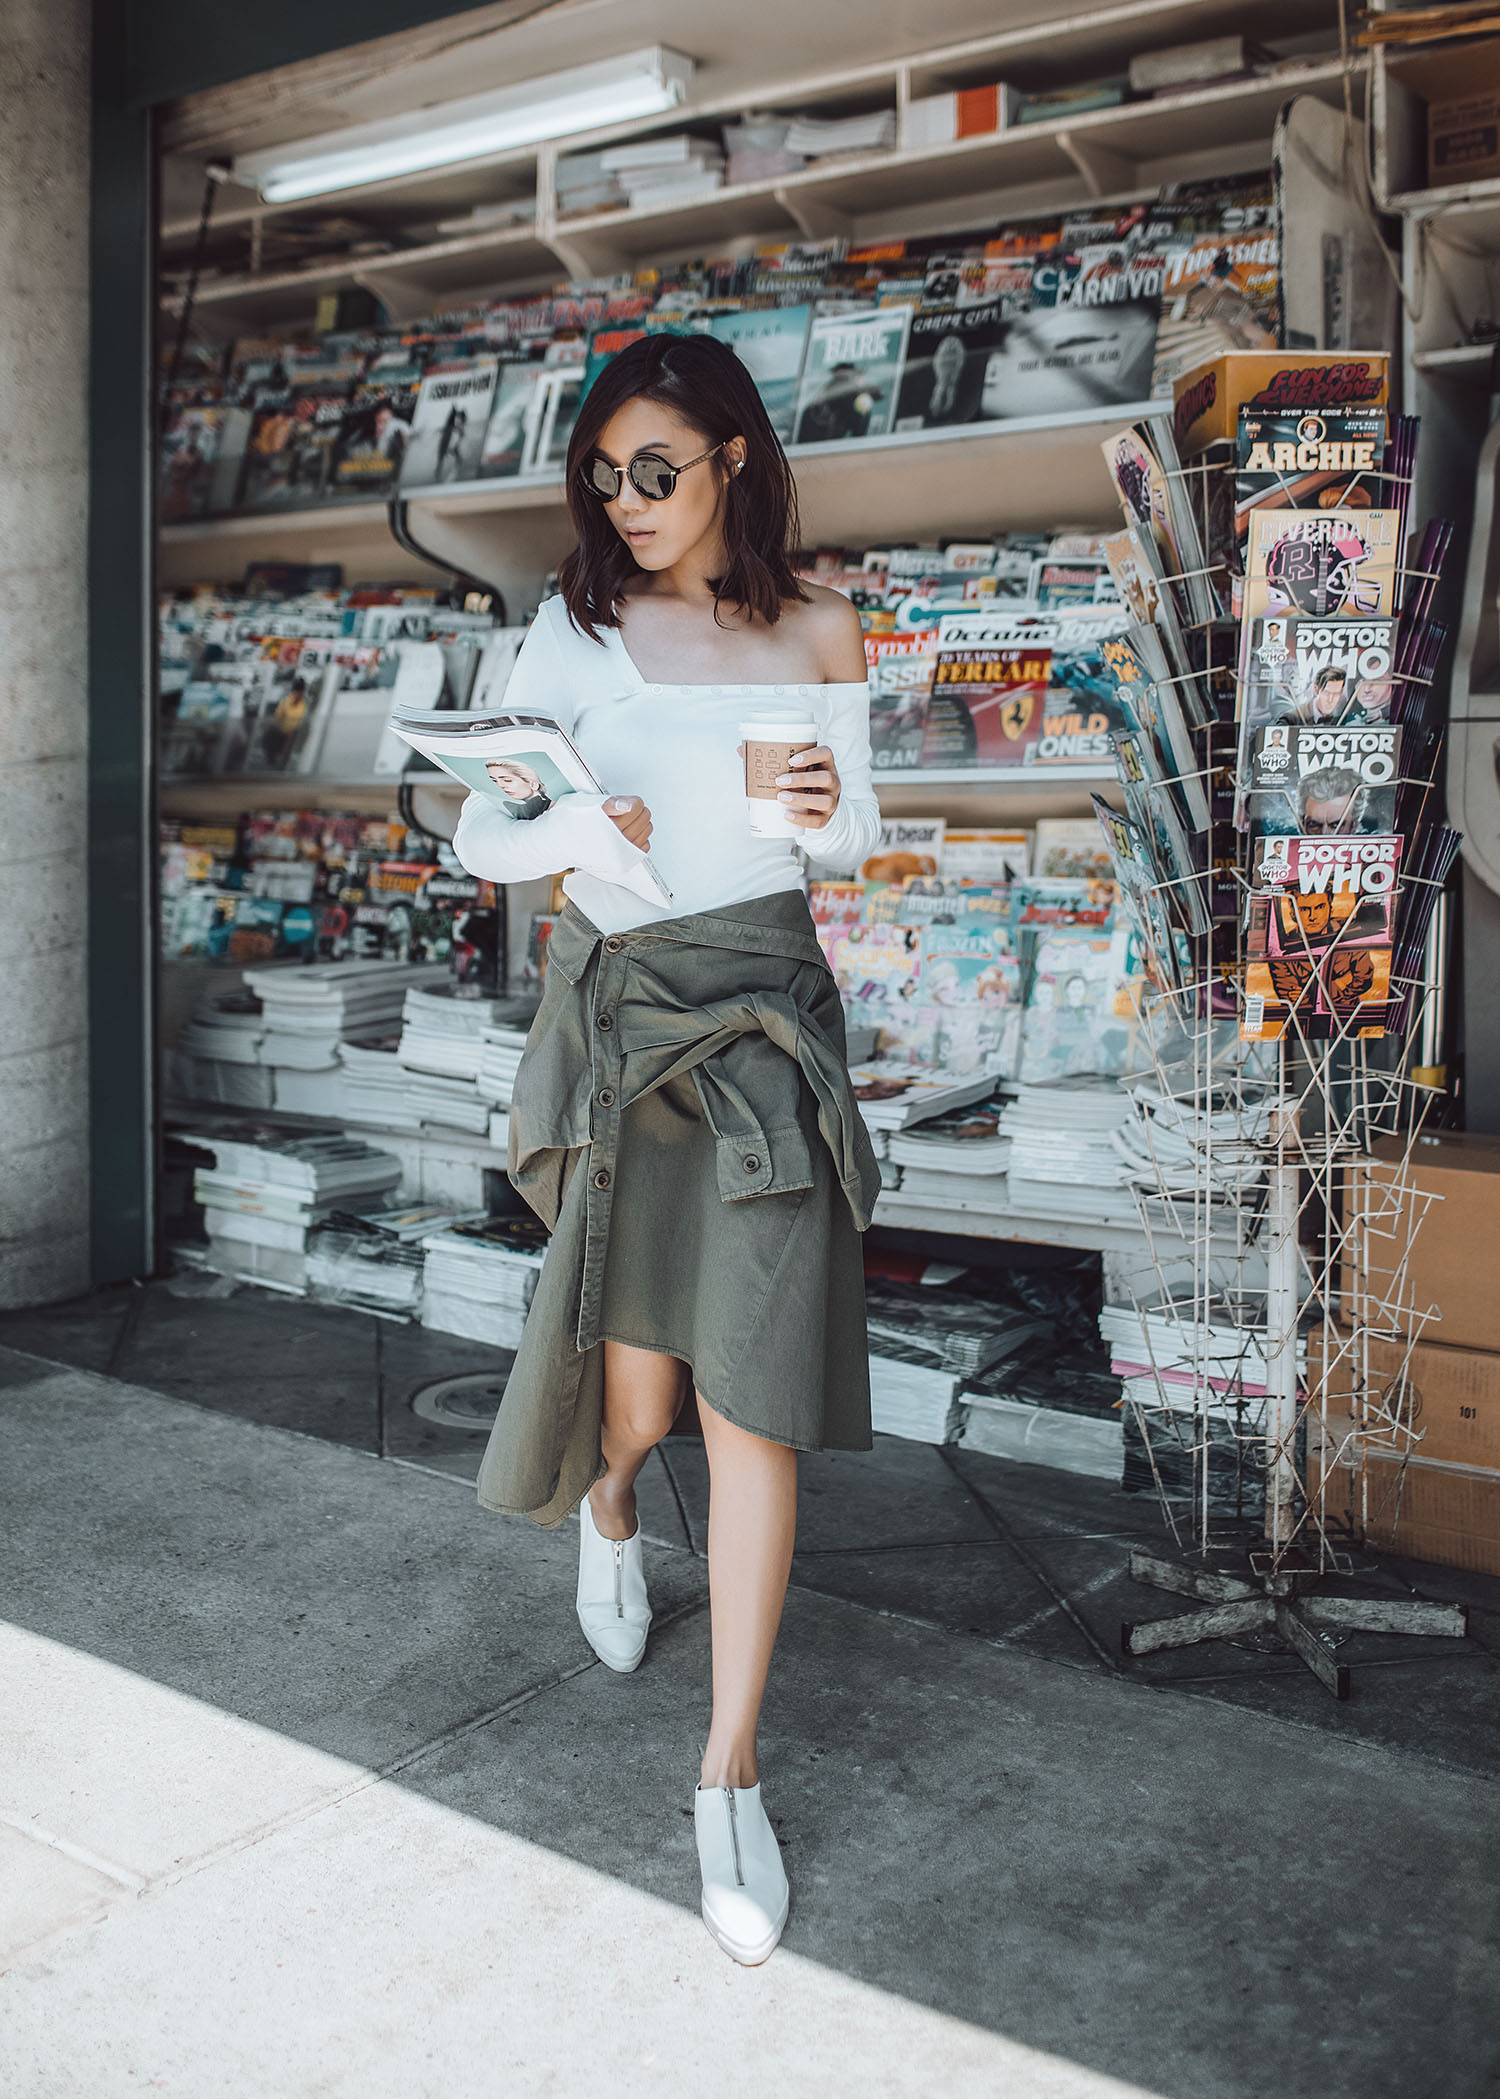 Summer Skirt Trend, Street style fashion blogger influencer Jenny Tsang of Tsangtastic wearing THE HOURS Top, FAITH CONNEXION Shirt Style Skirt, STELLA MCCARTNEY Zip Front Sneaker, in Los Angeles, California.